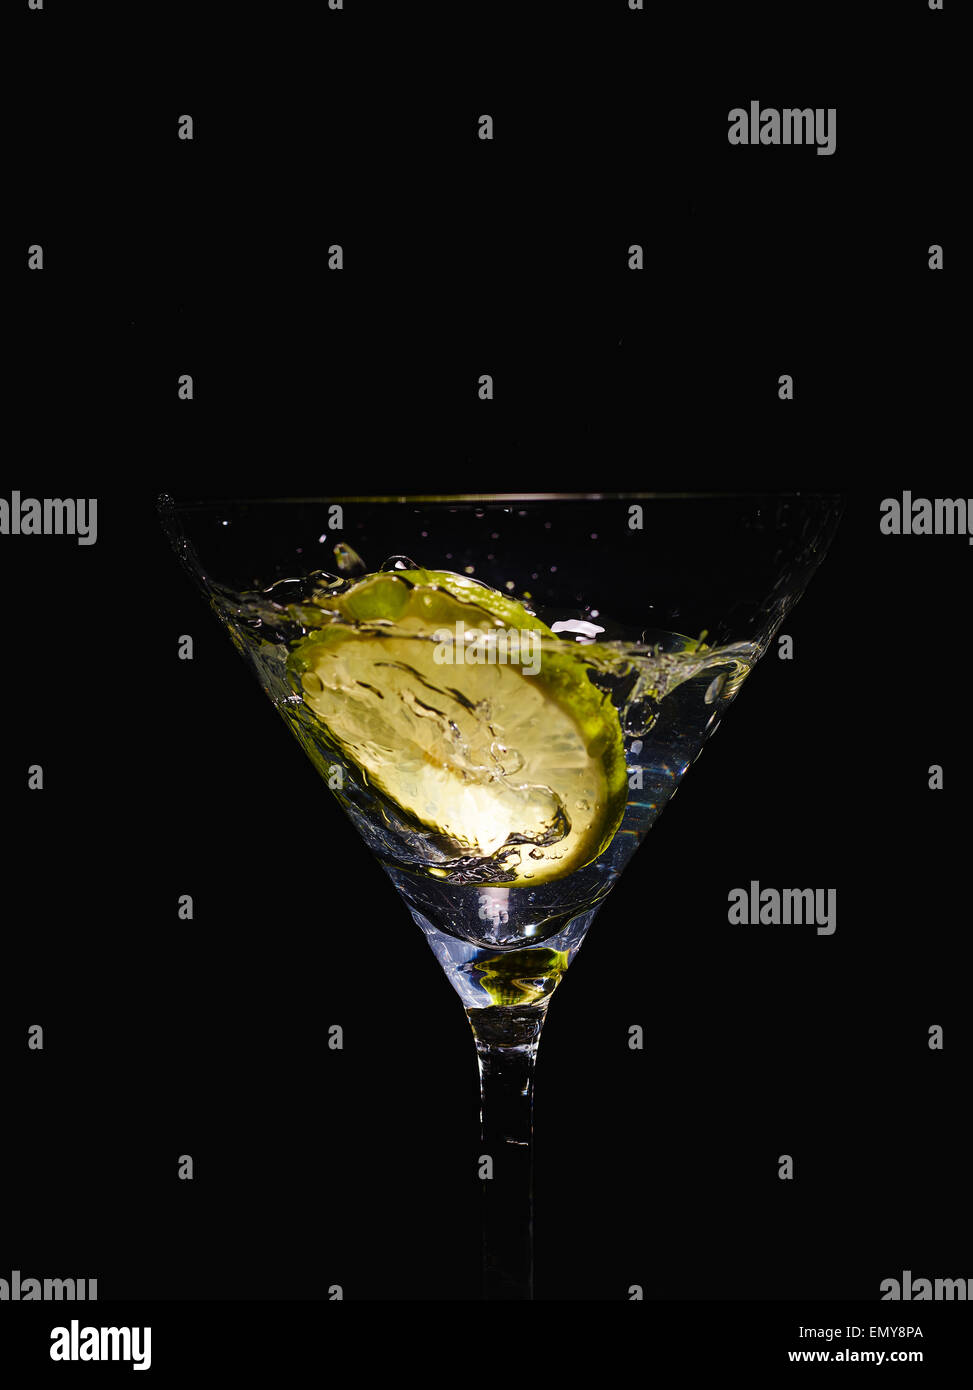 Martini glass and alcoholic beverage with a lime slice, splashes, black background Stock Photo